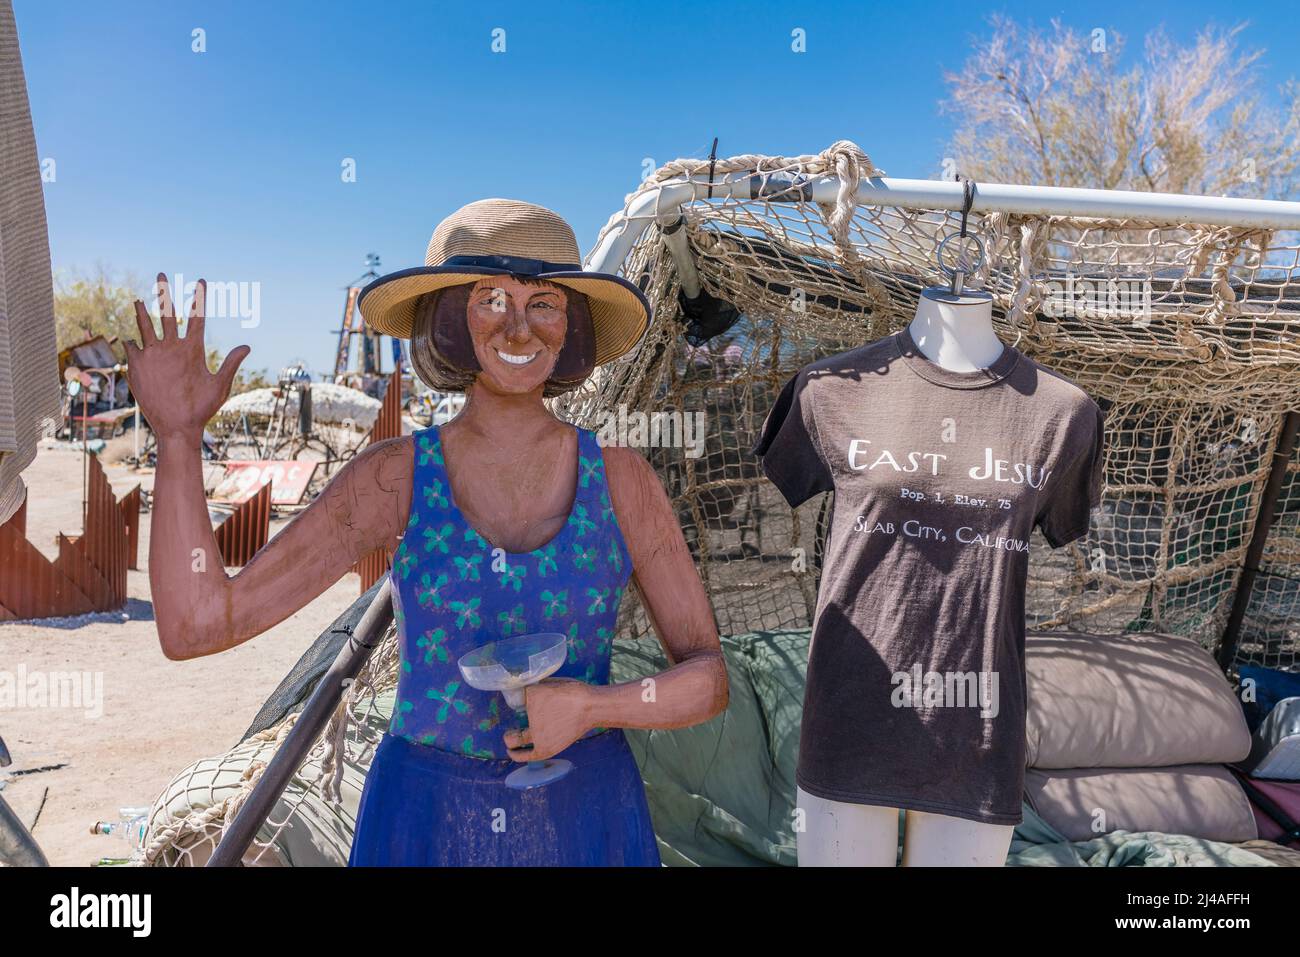 A waving cutout female figure in East Jesus, California. East Jesus is an off-the-grid art community in the Sonoran Desert of Southern California. The Stock Photo